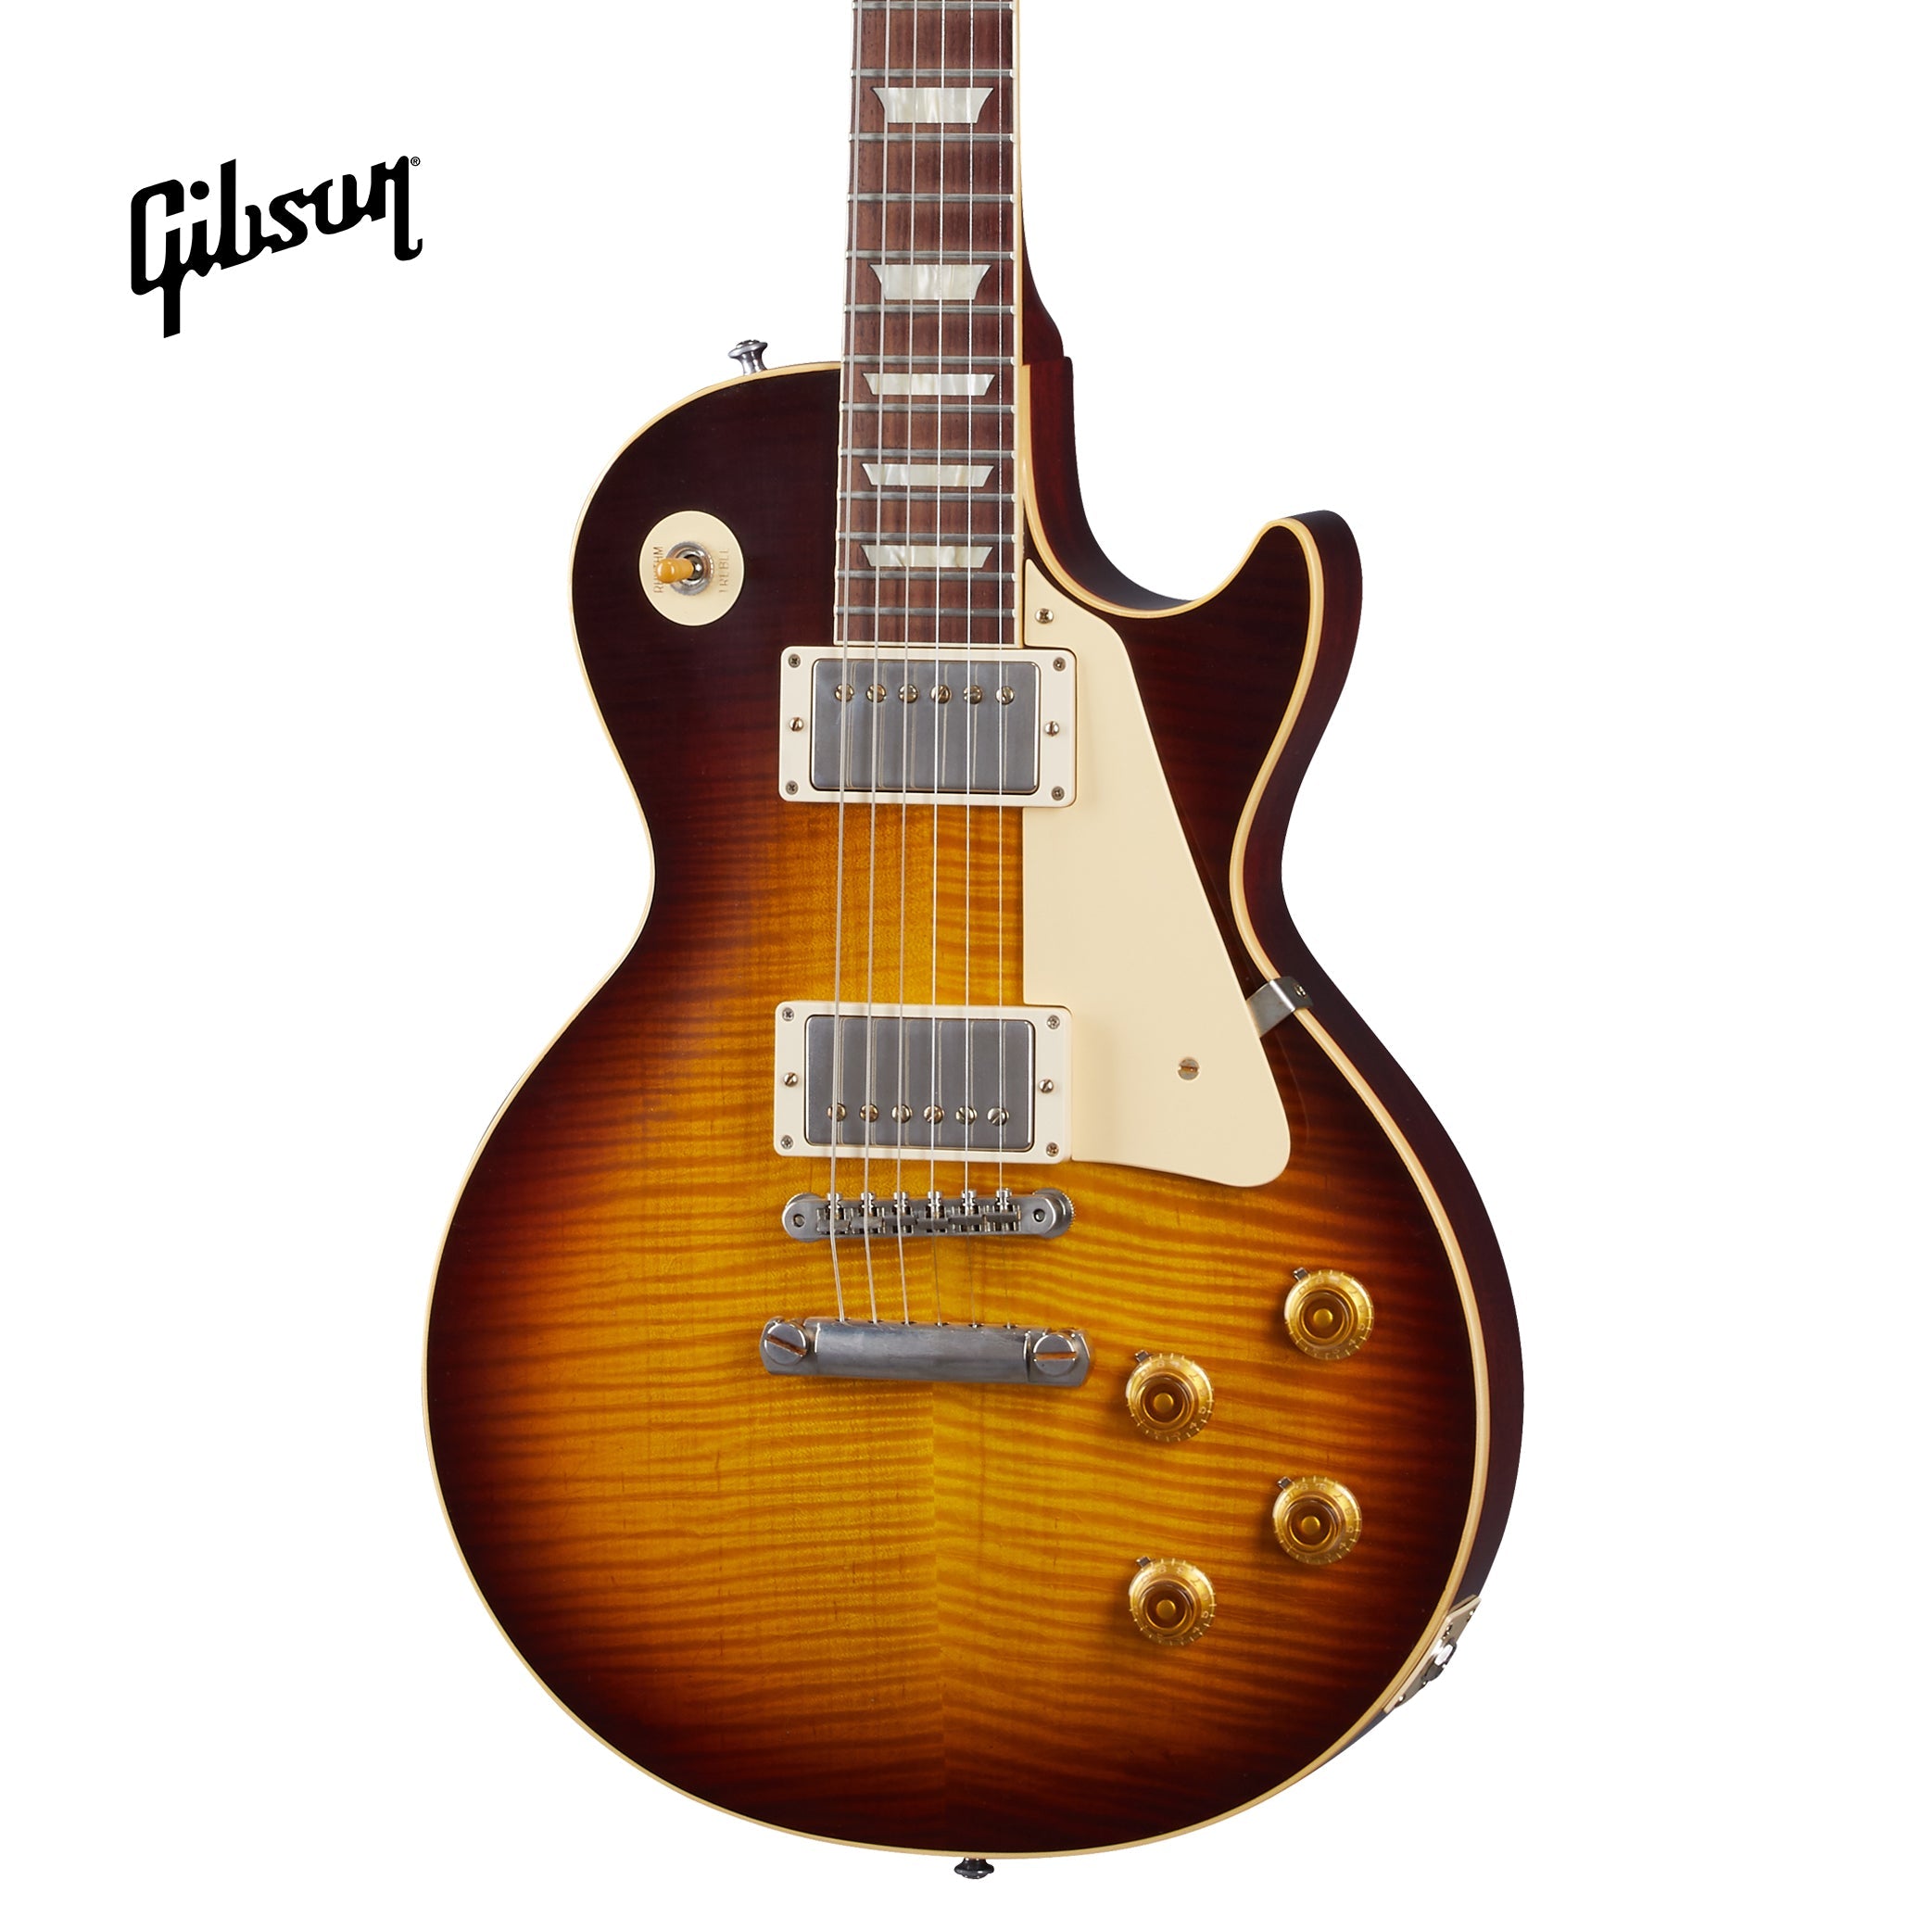 GIBSON 1959 LES PAUL STANDARD REISSUE ULTRA LIGHT AGED ELECTRIC GUITAR - SOUTHERN FADE